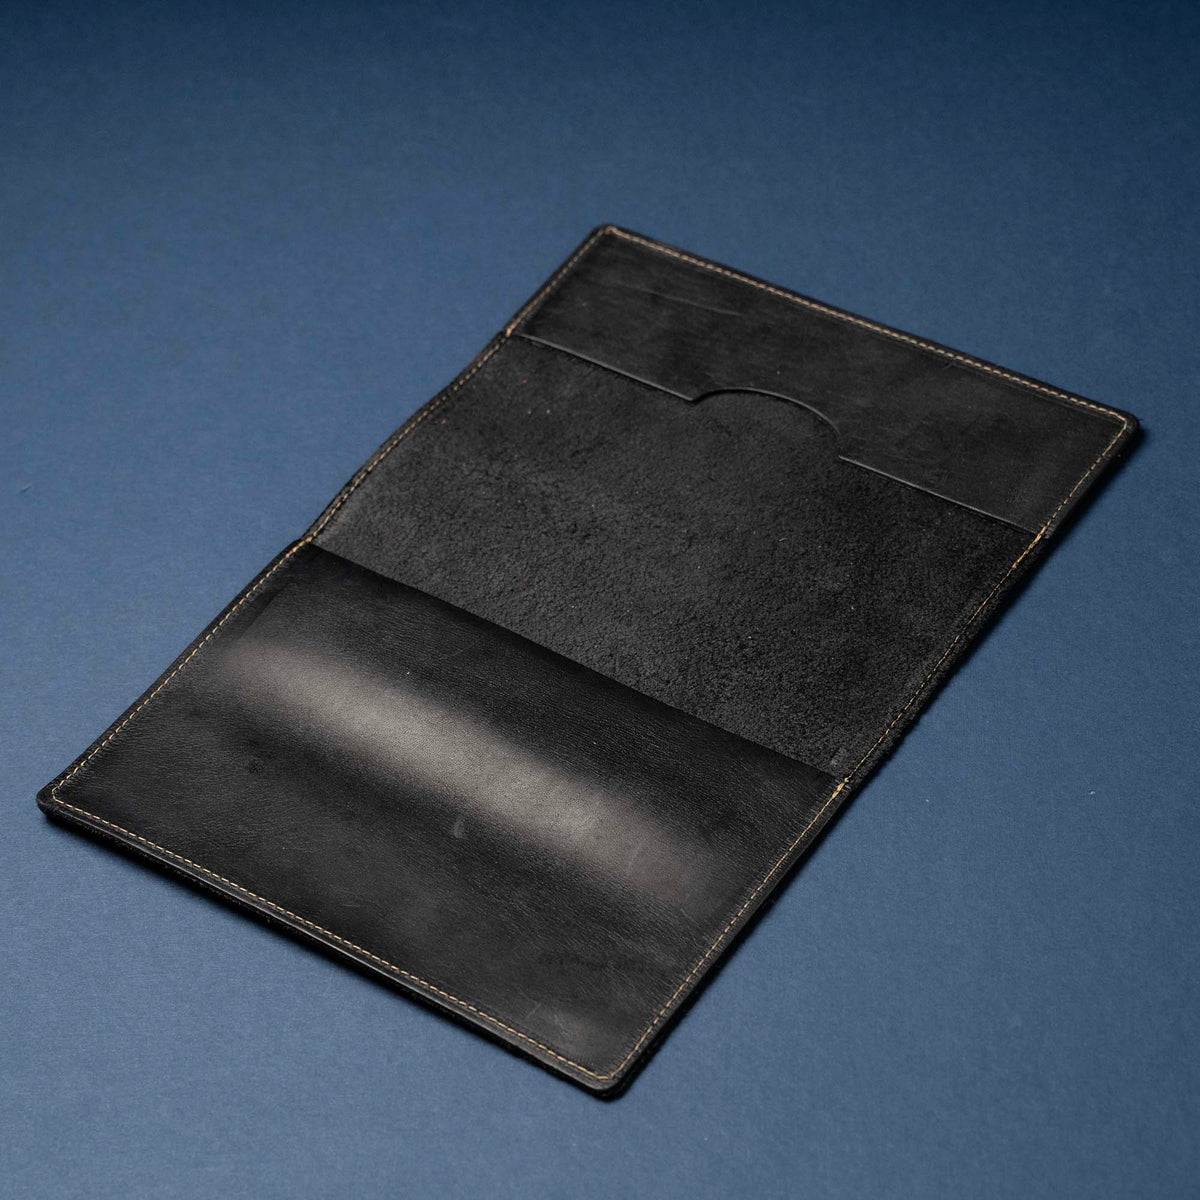 Black Cowhide - A5 Leather Journal - High Character (One-Of-A-Kind) Notebooks - 192 pages 8.75” x 6.25”